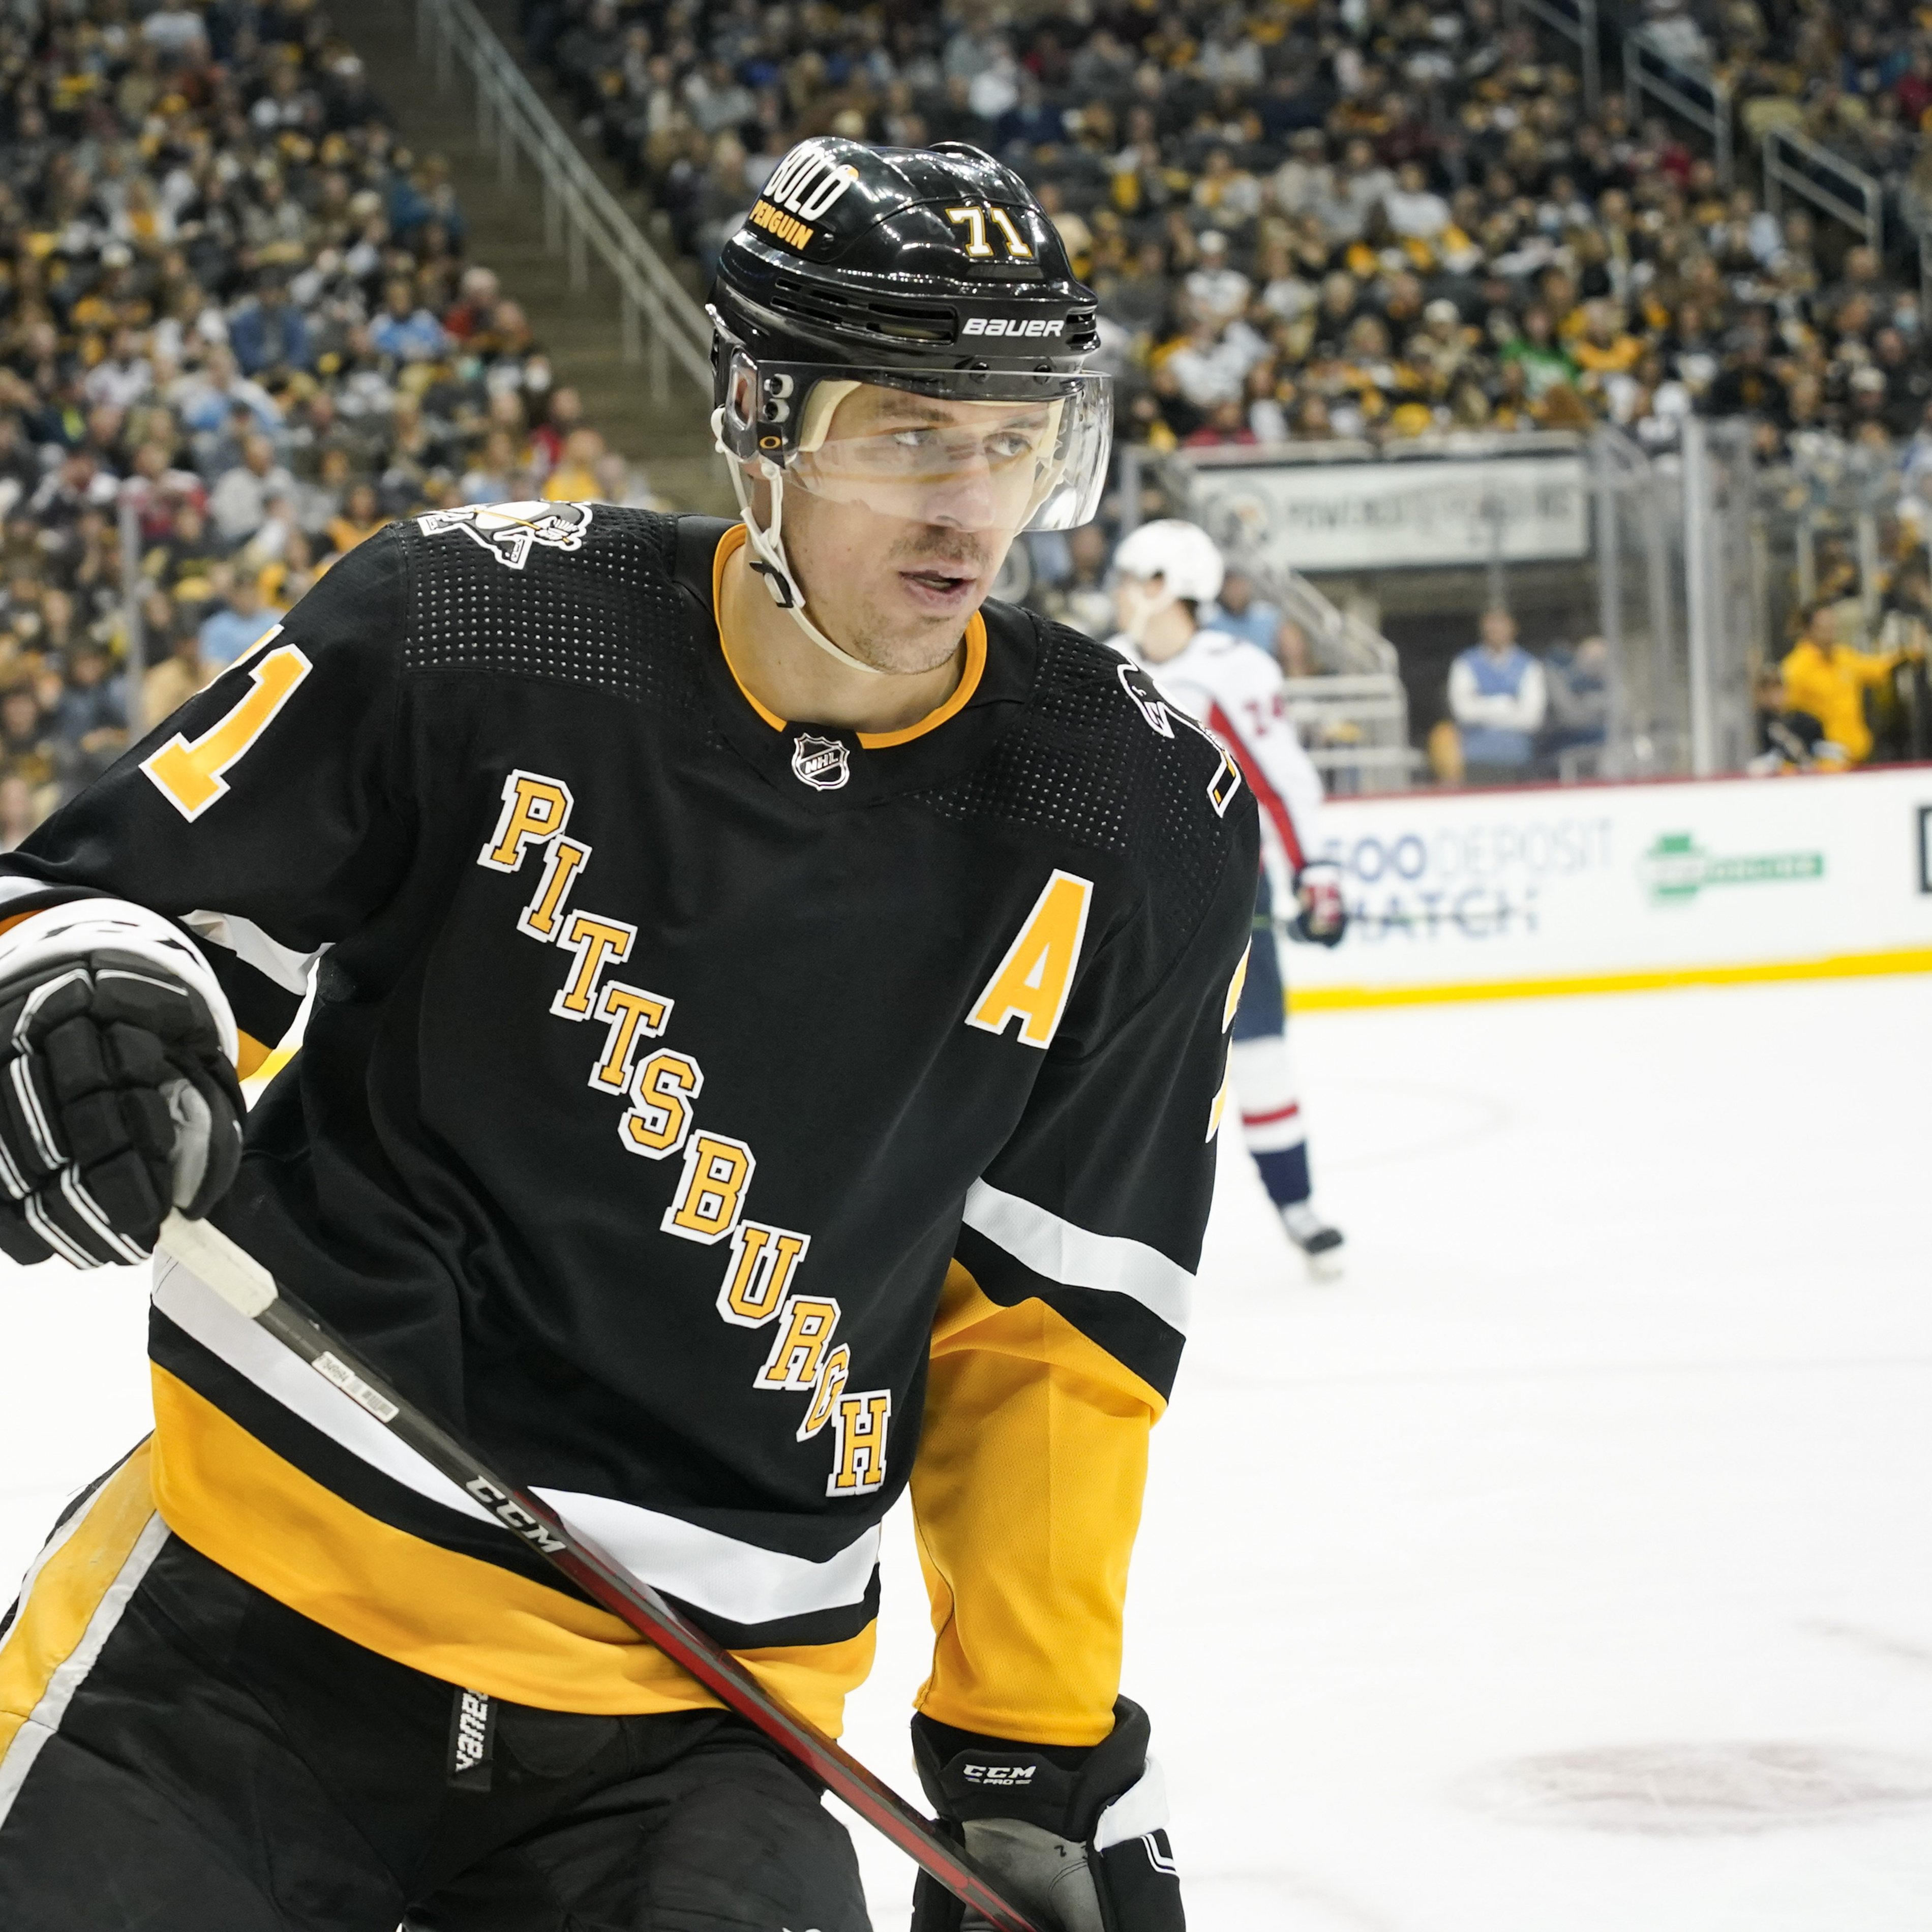 Evgeni Malkin, Penguins Agree to 4-Year Contract with $6.1M AAV